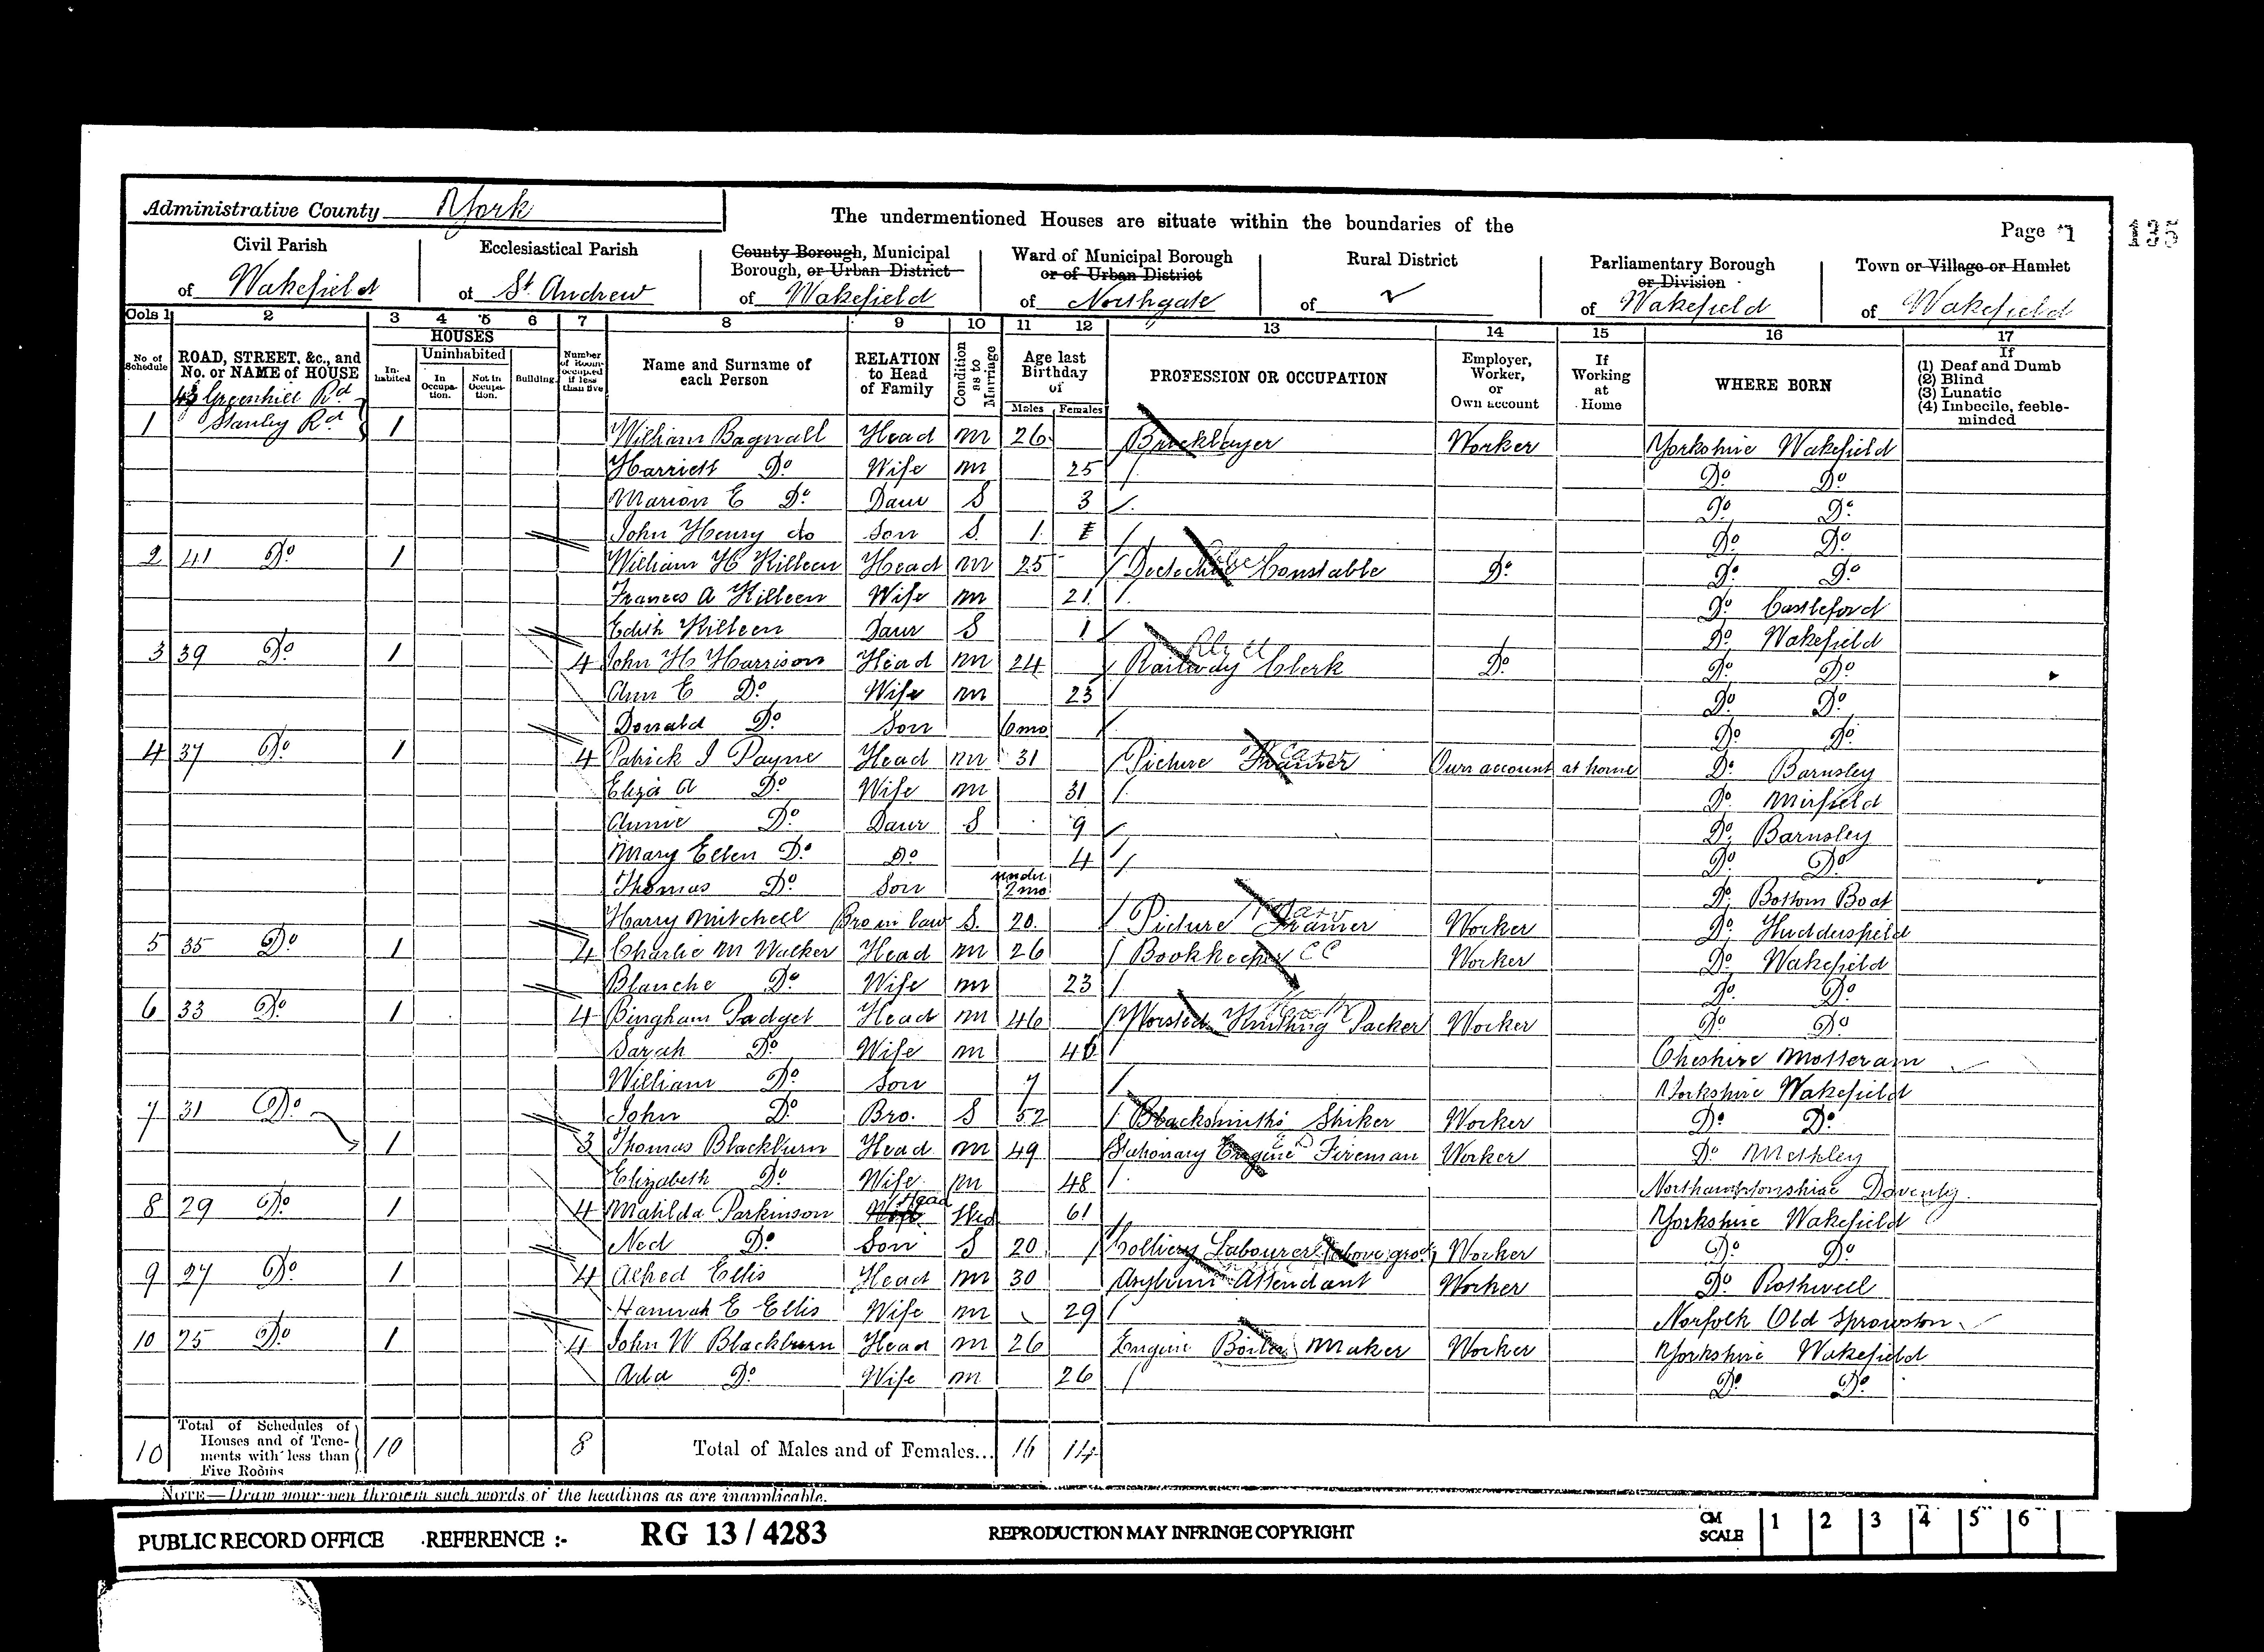 1901 Census entry for William Bagnall Household